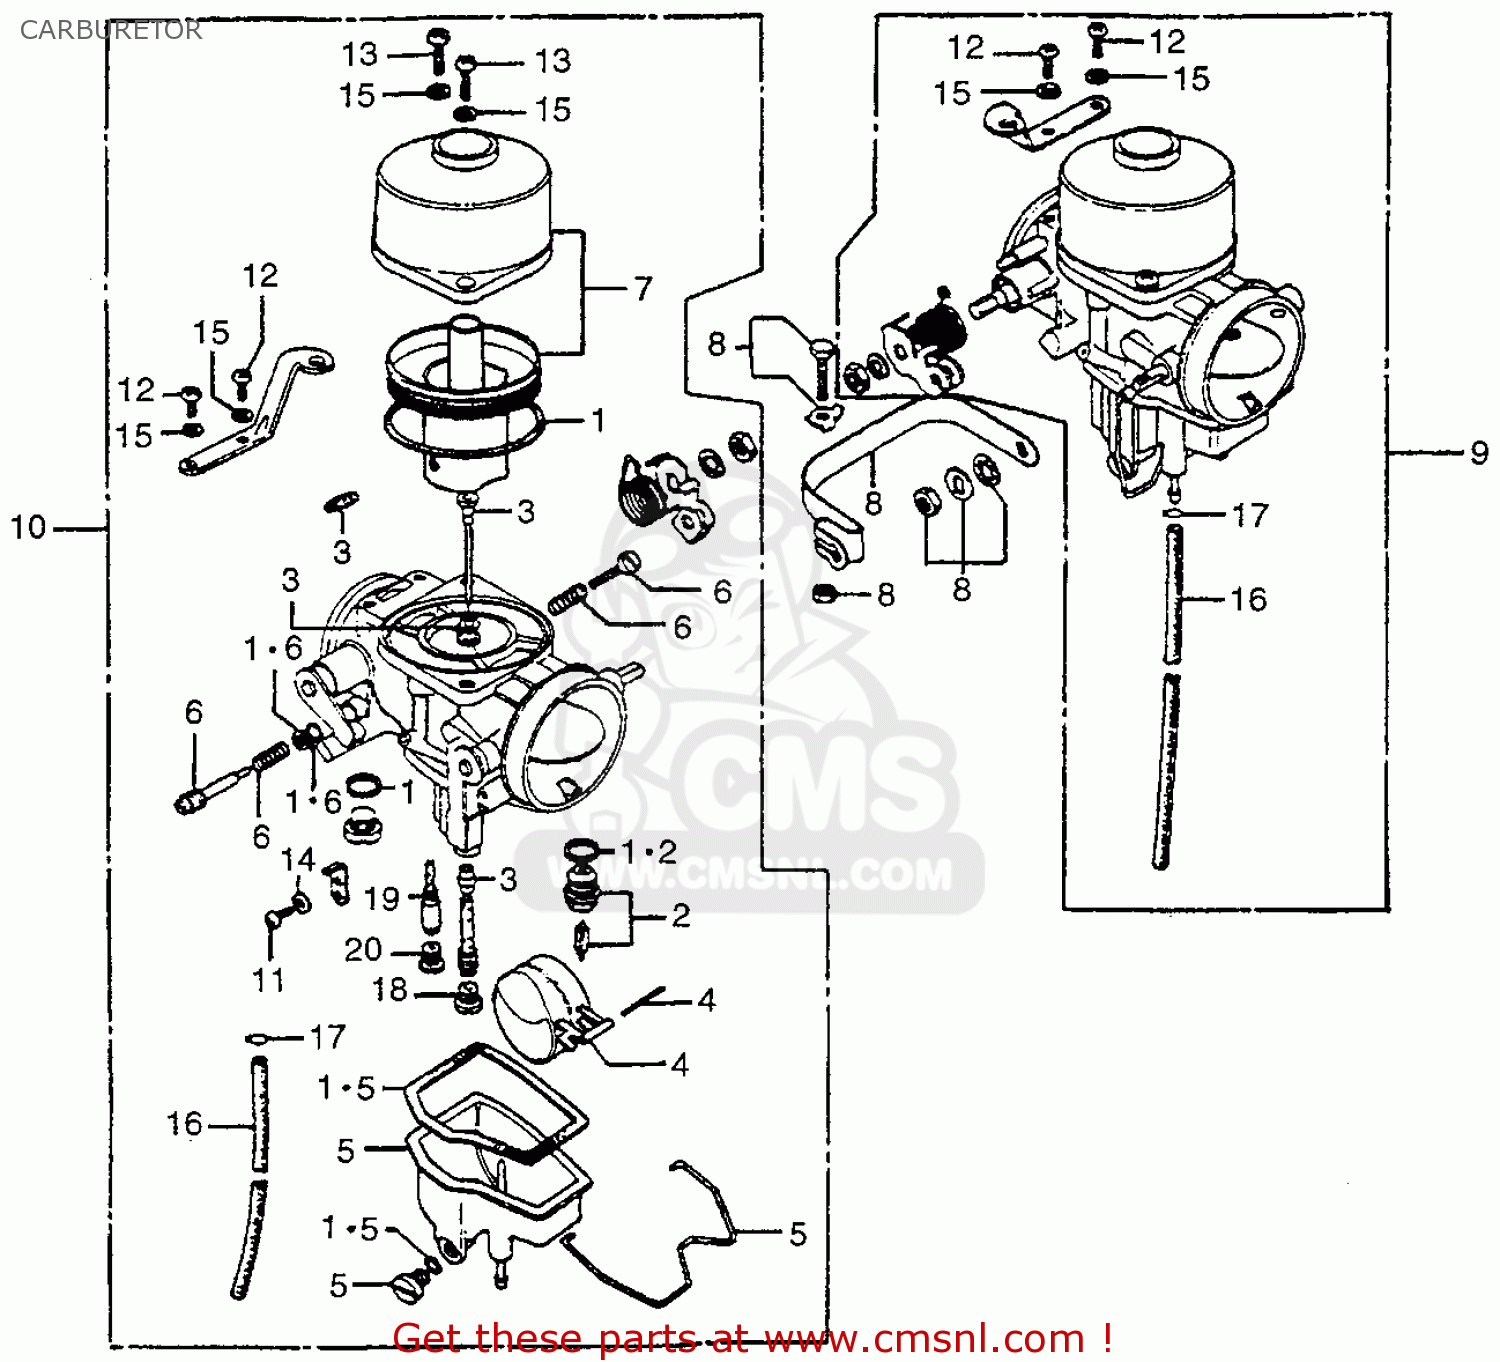 Carb tuning question, but with some good starting ideas... 1970 honda 350 cb wiring 